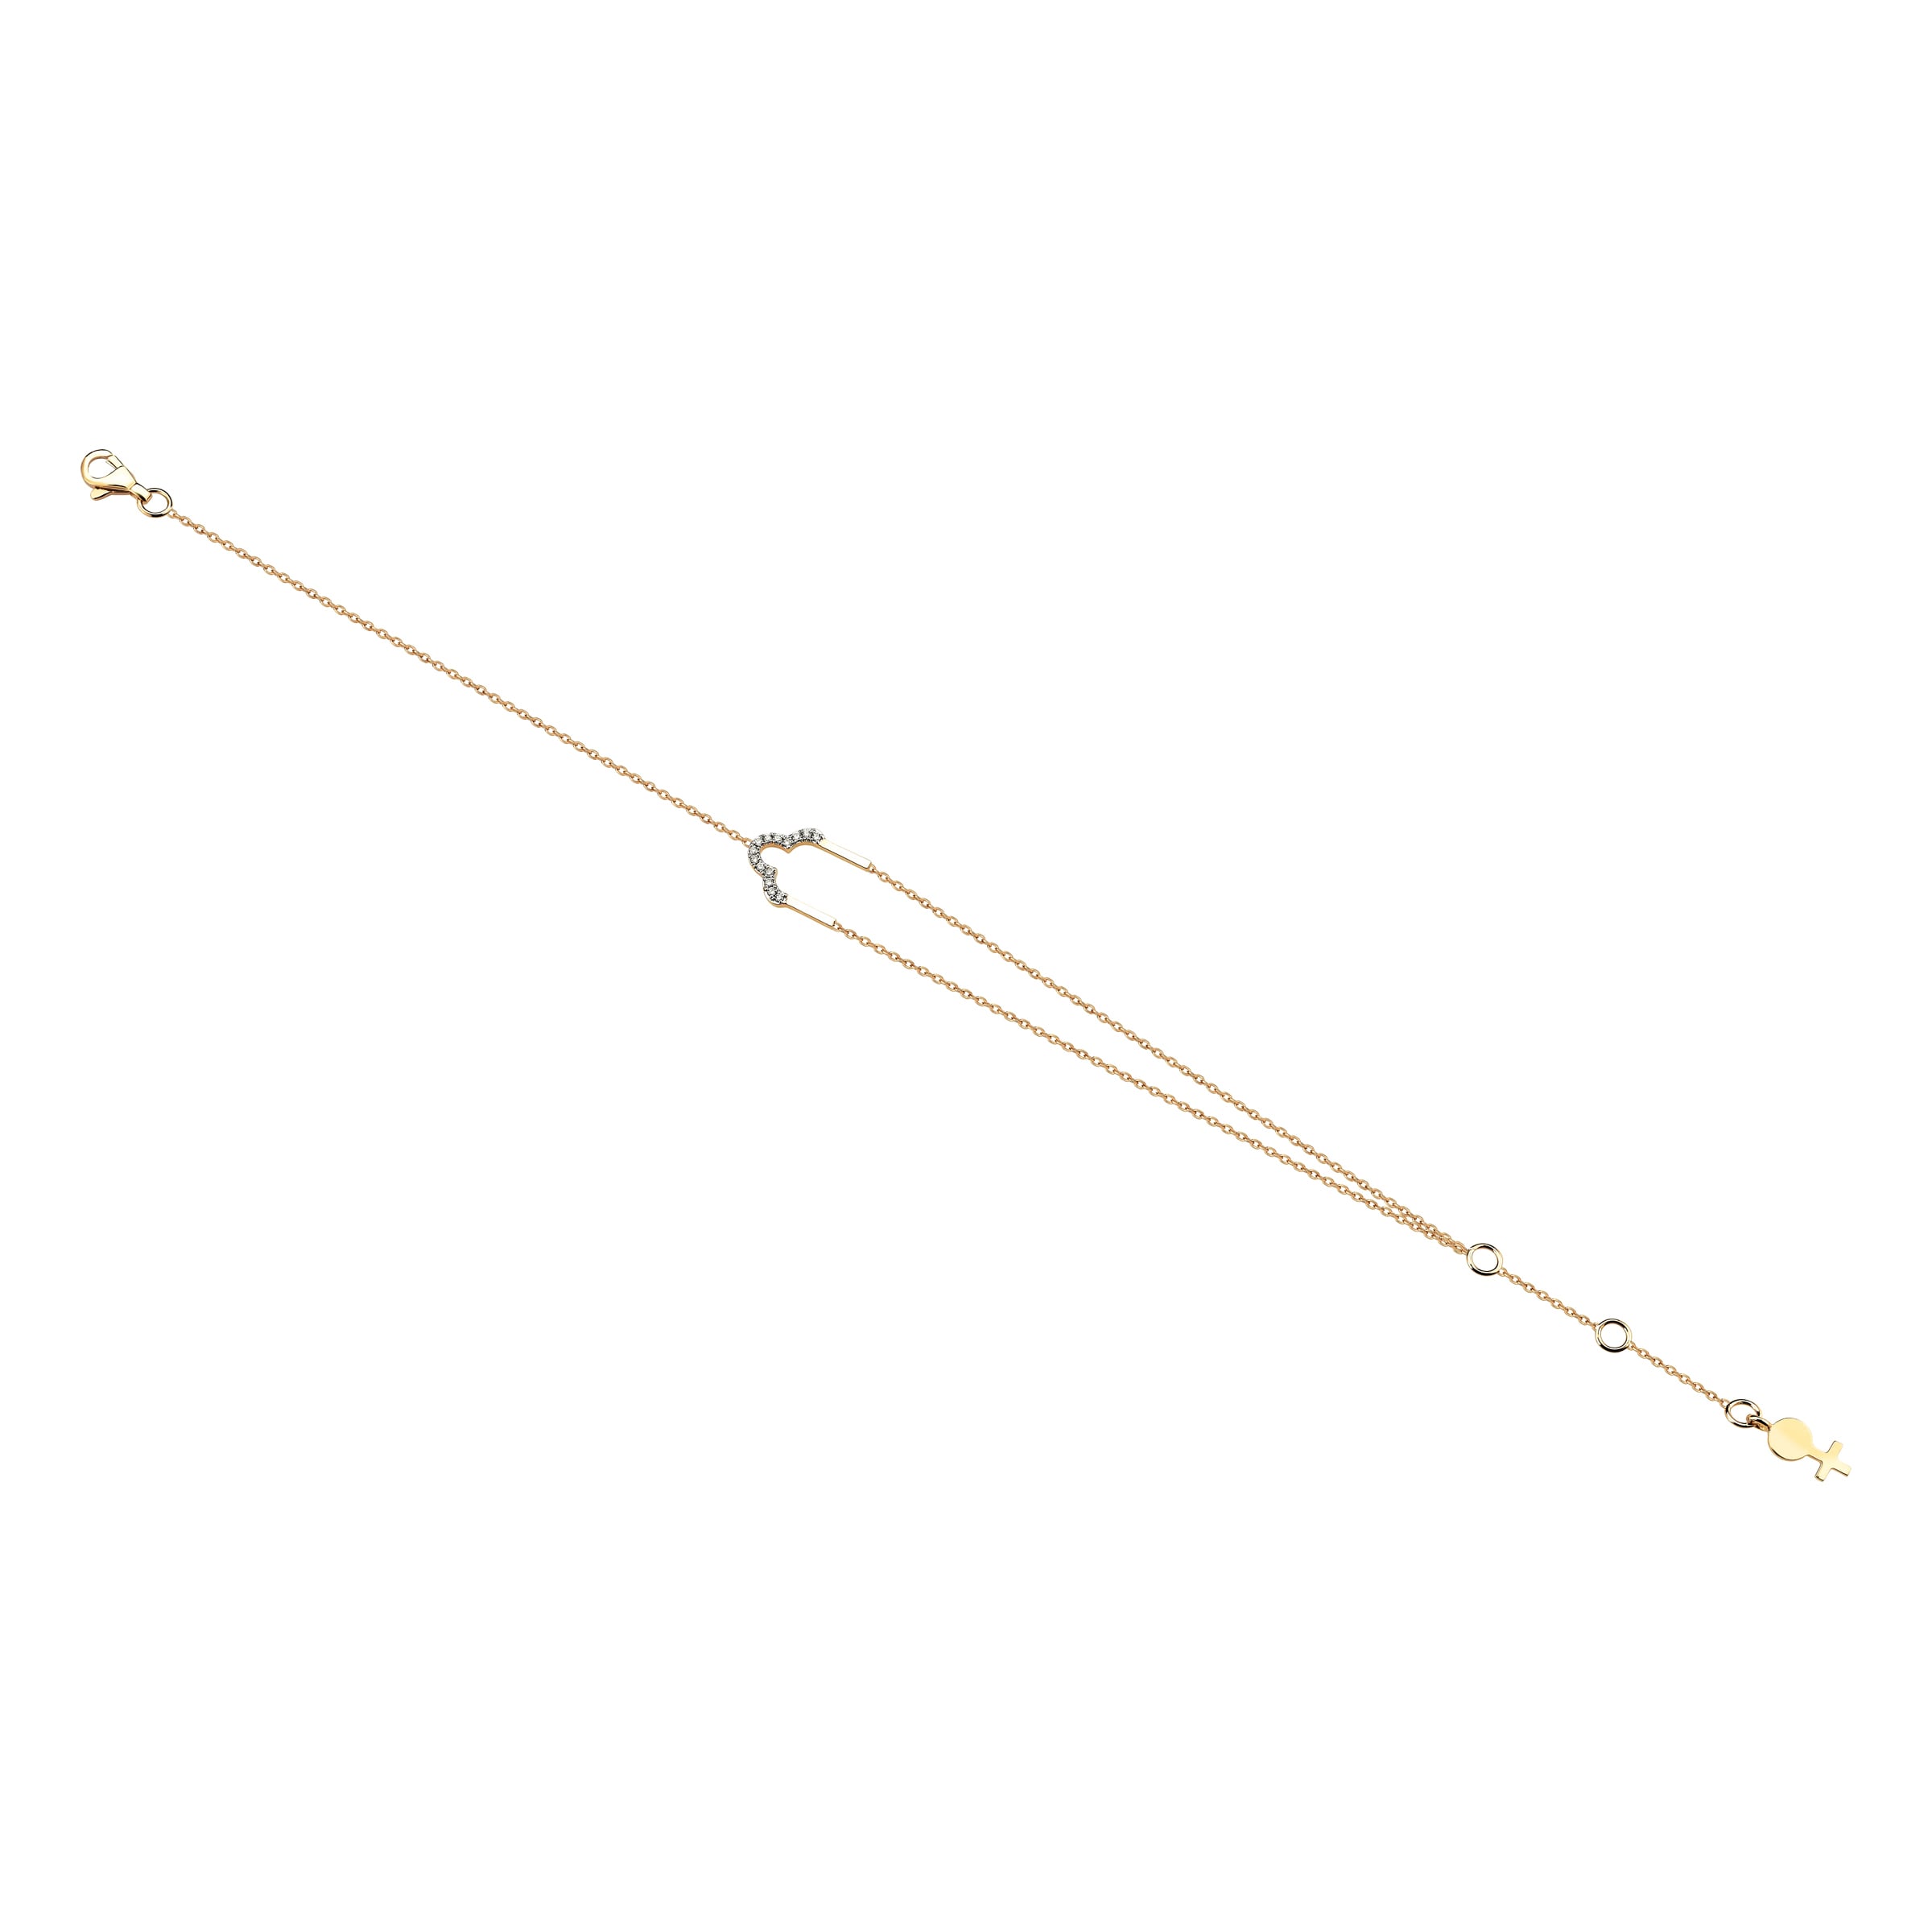 Round Trefoil Anklet in Yellow Gold - Her Story Shop